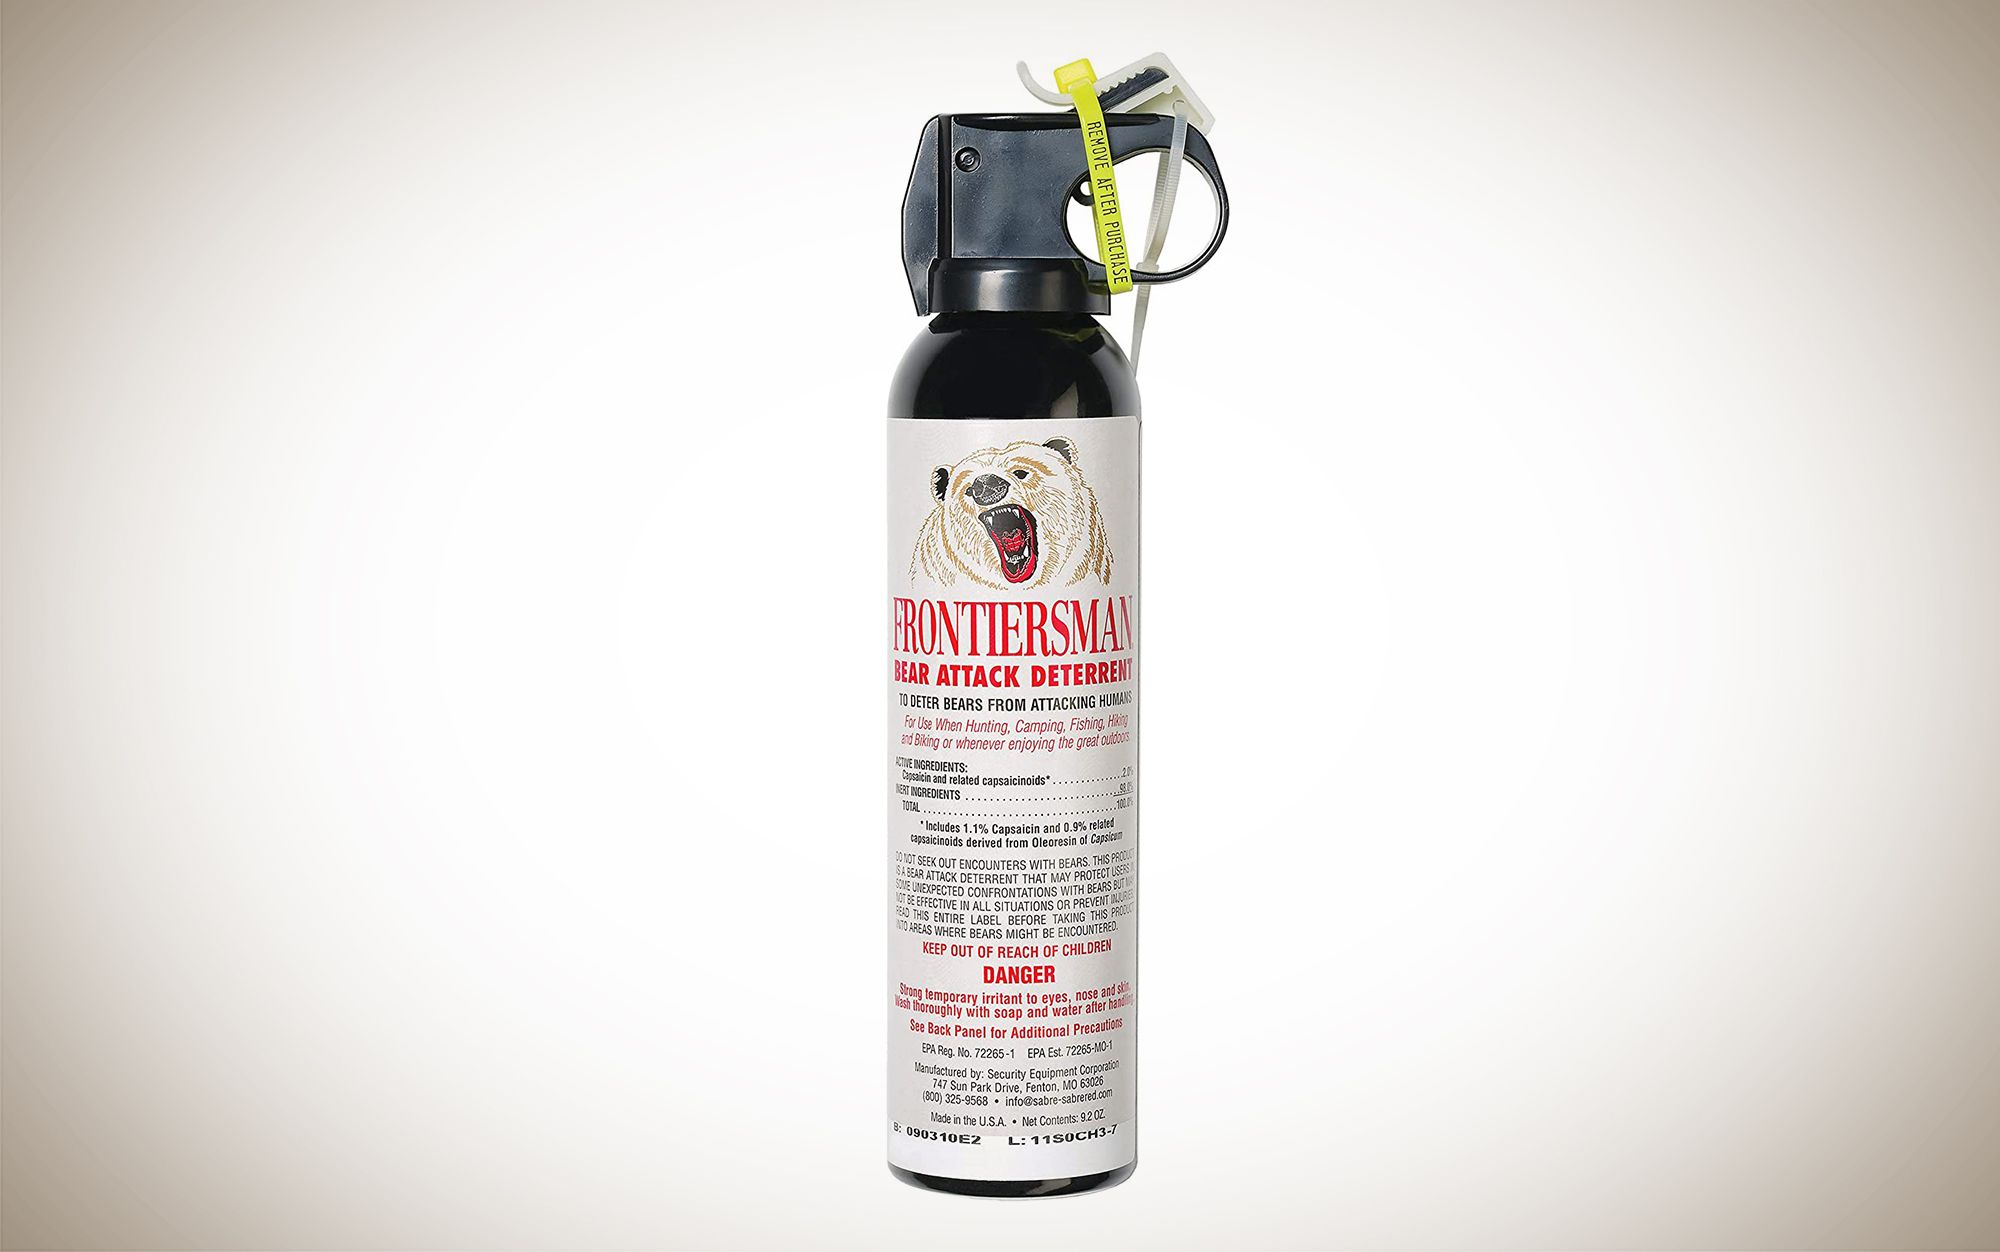 Sabre Frontiersman Bear Spray is one of the best bear deterrent options on the market.